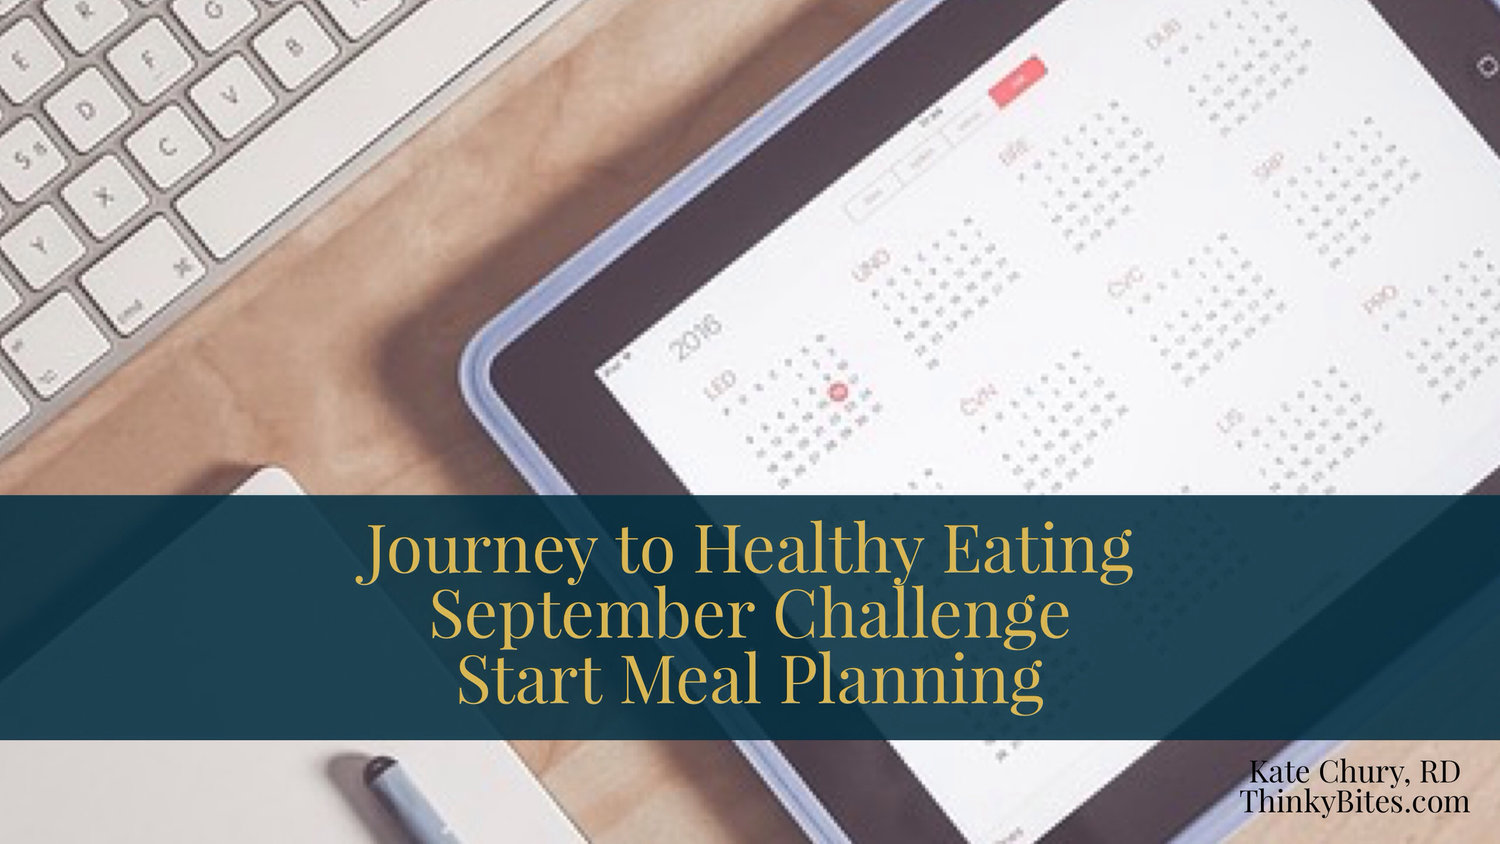 Journey To Healthy Eating Challenge 2017: September Edition